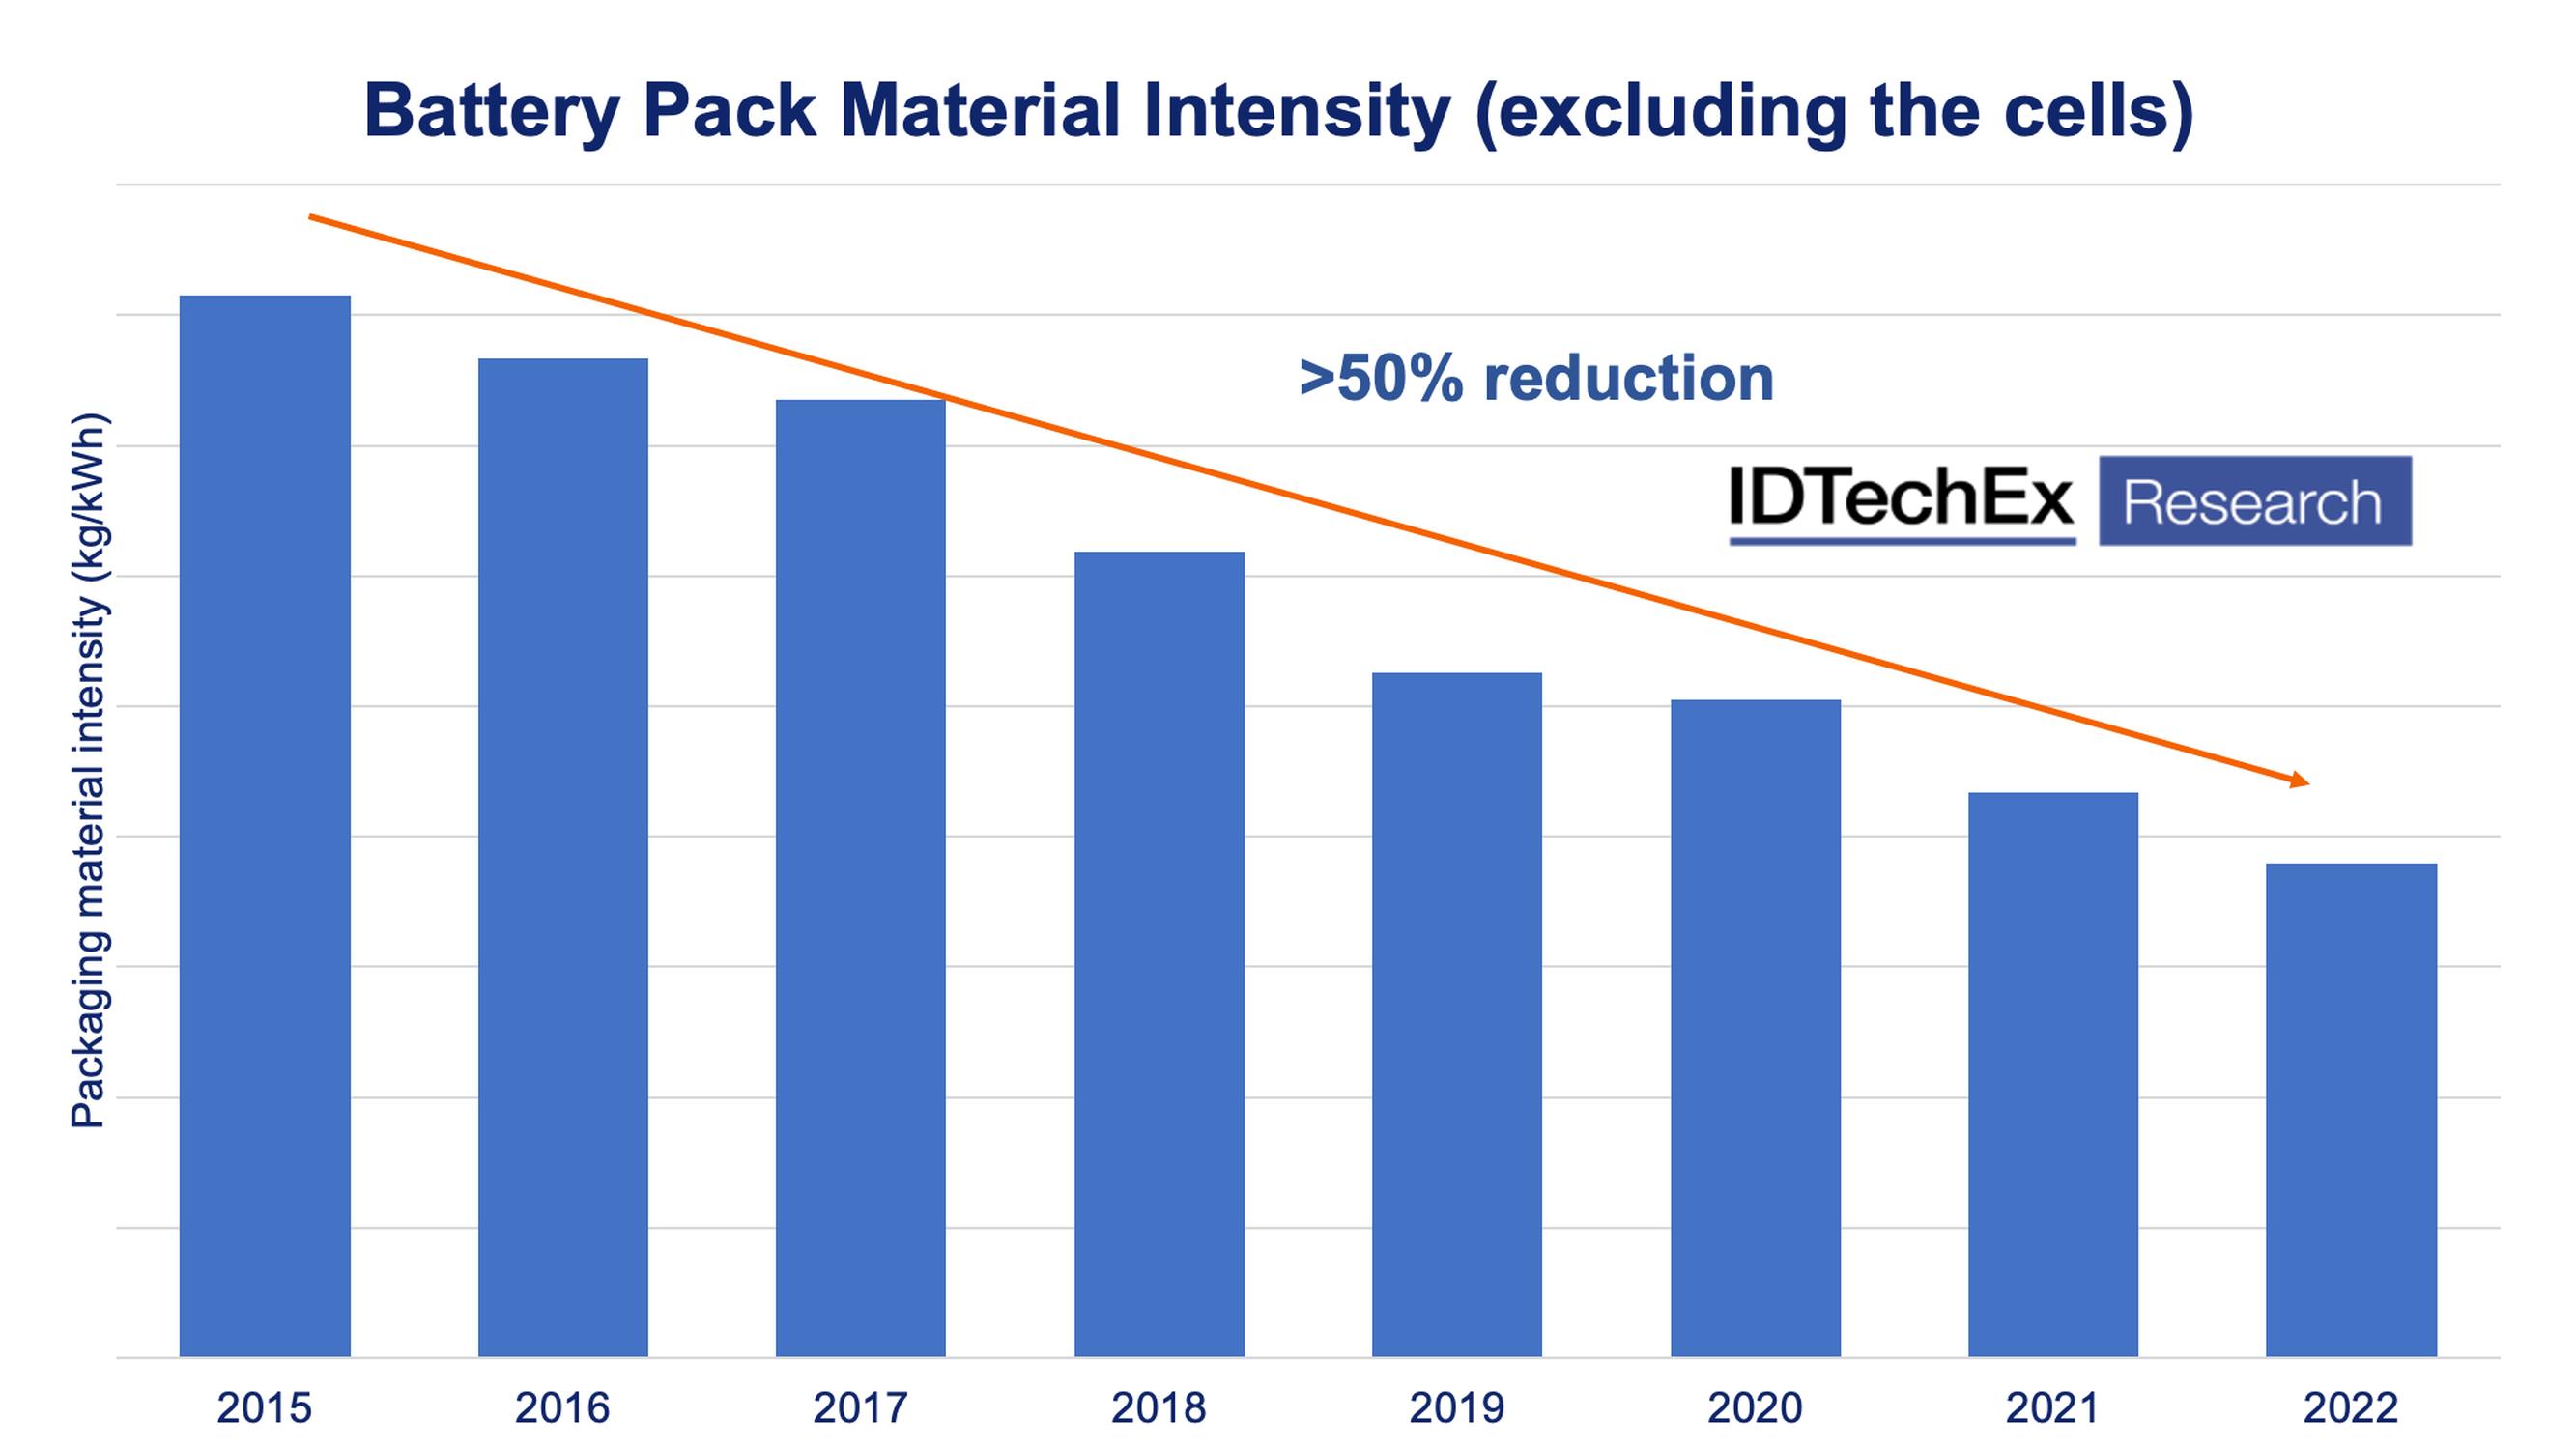 Packaging EV battery cells has improved significantly over time. Source: IDTechEx